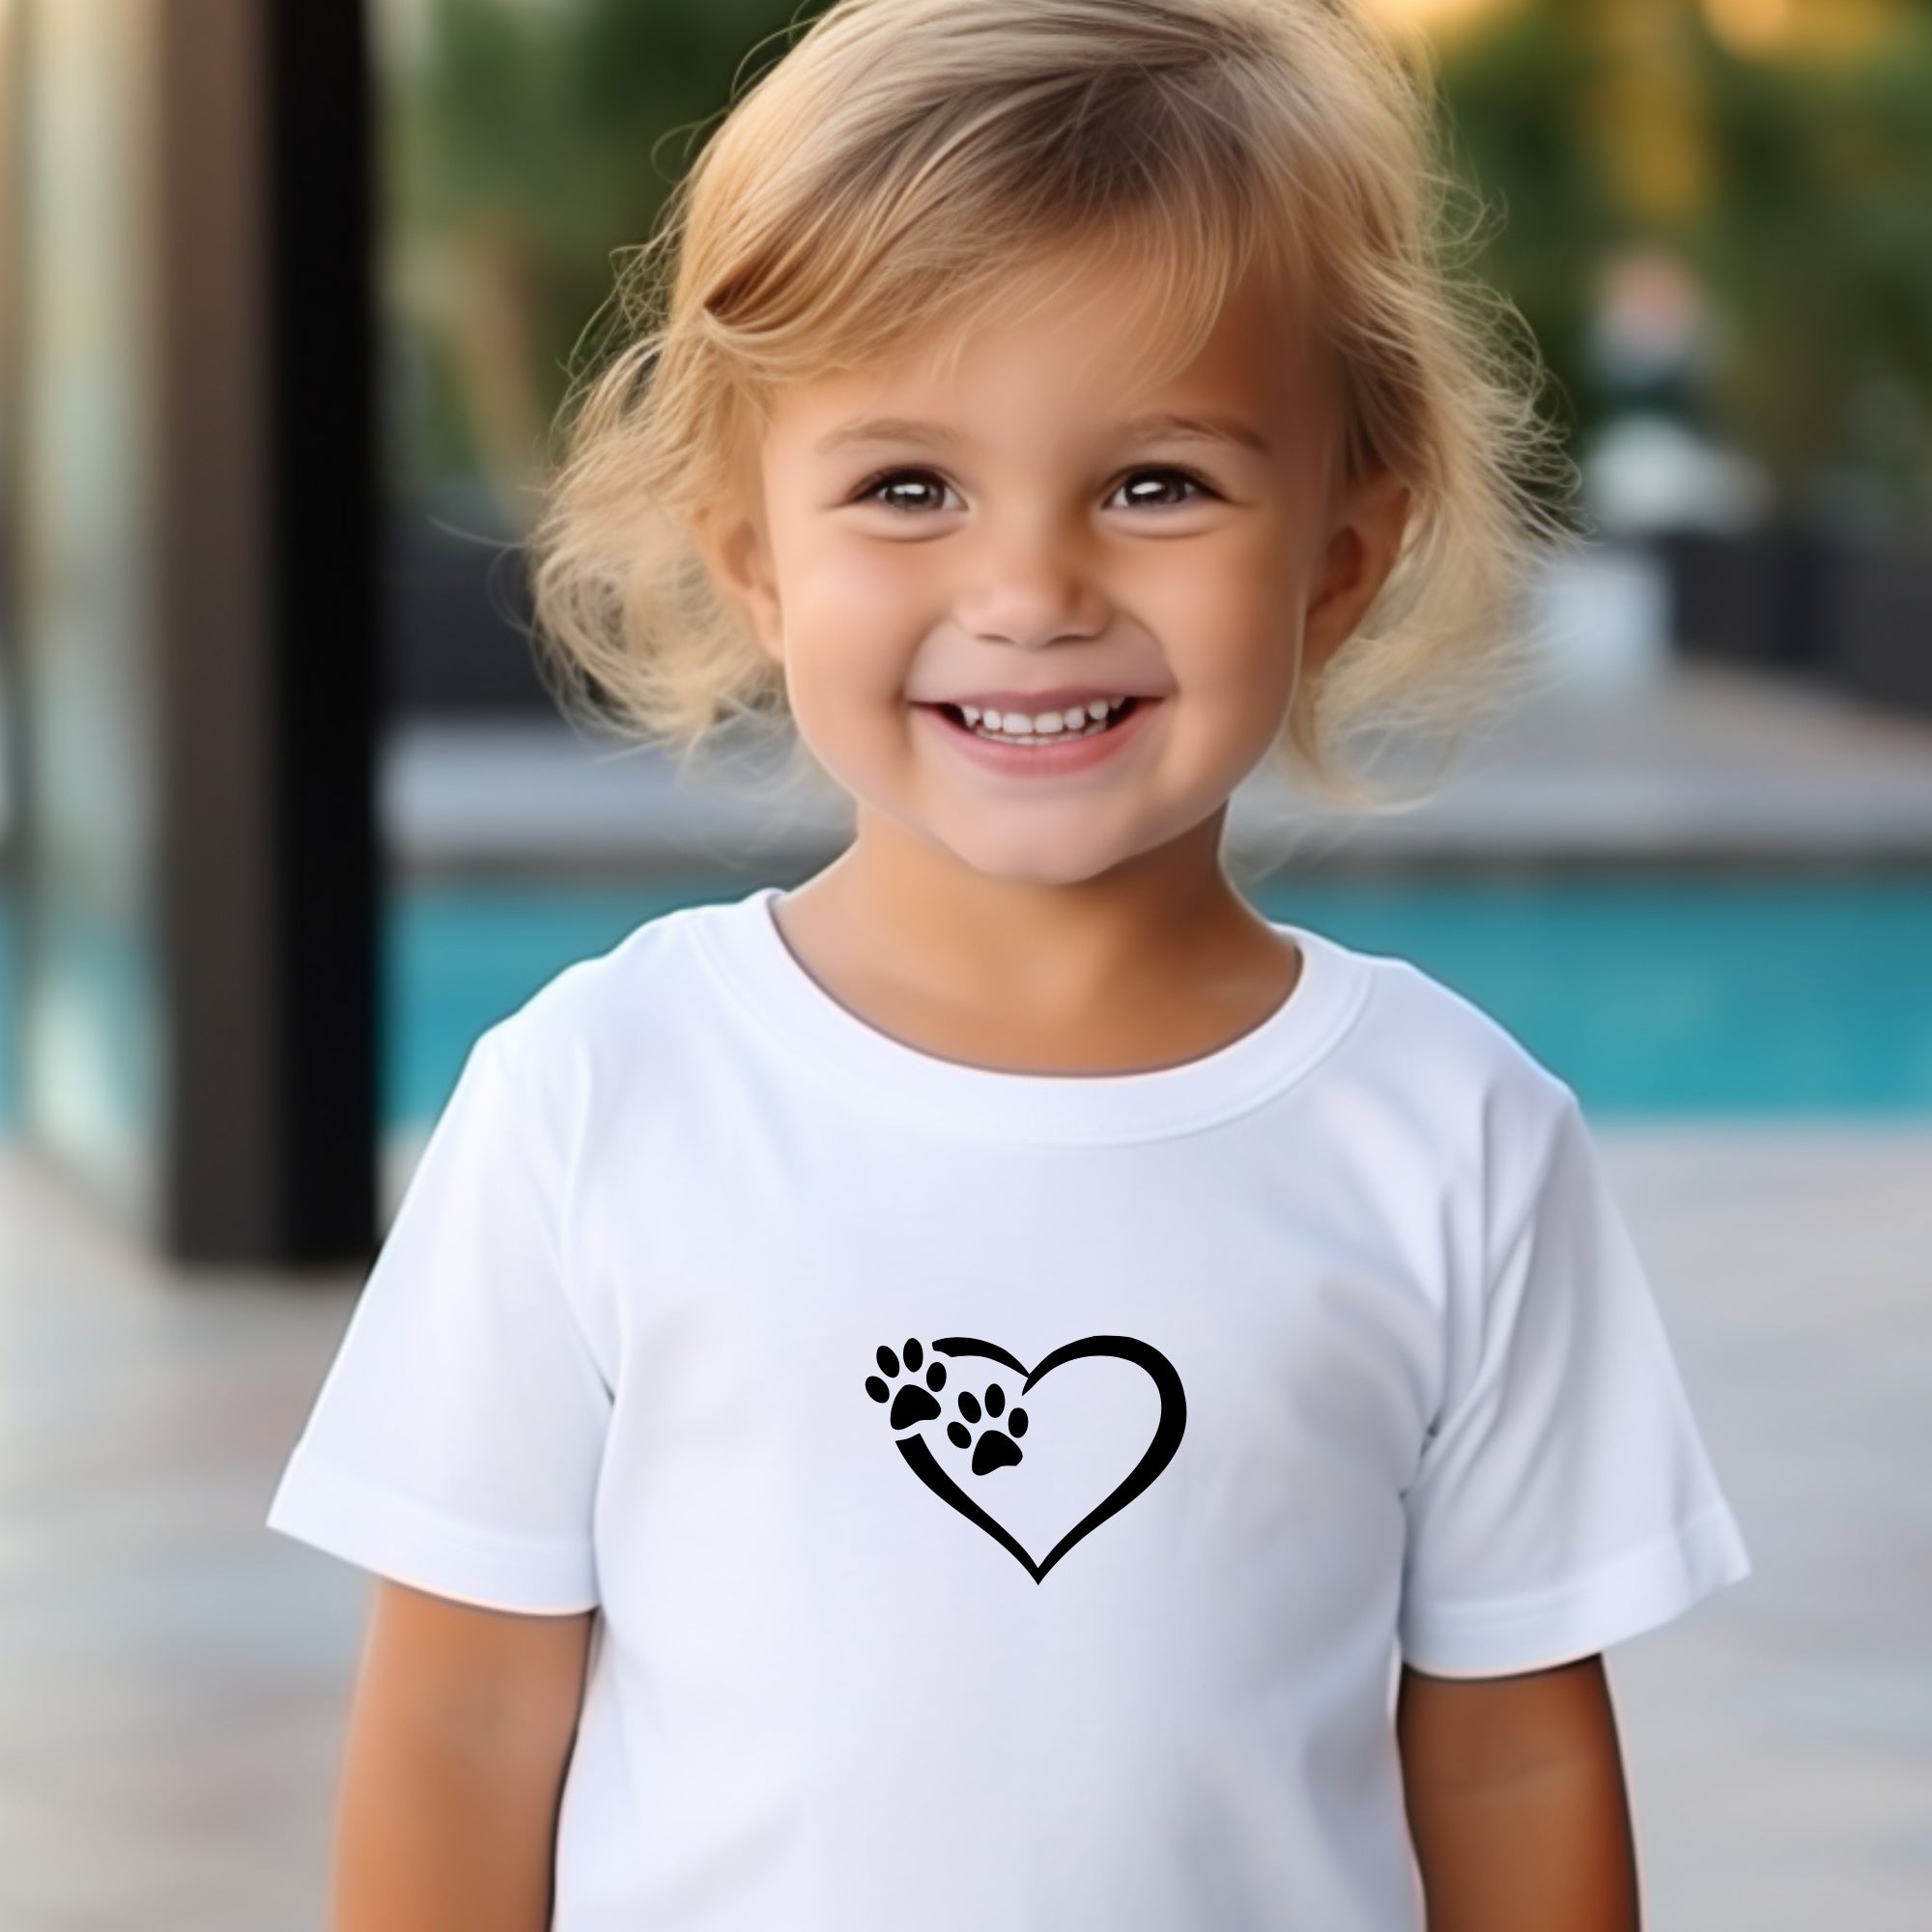 Heart and Paws Kids T Shirt